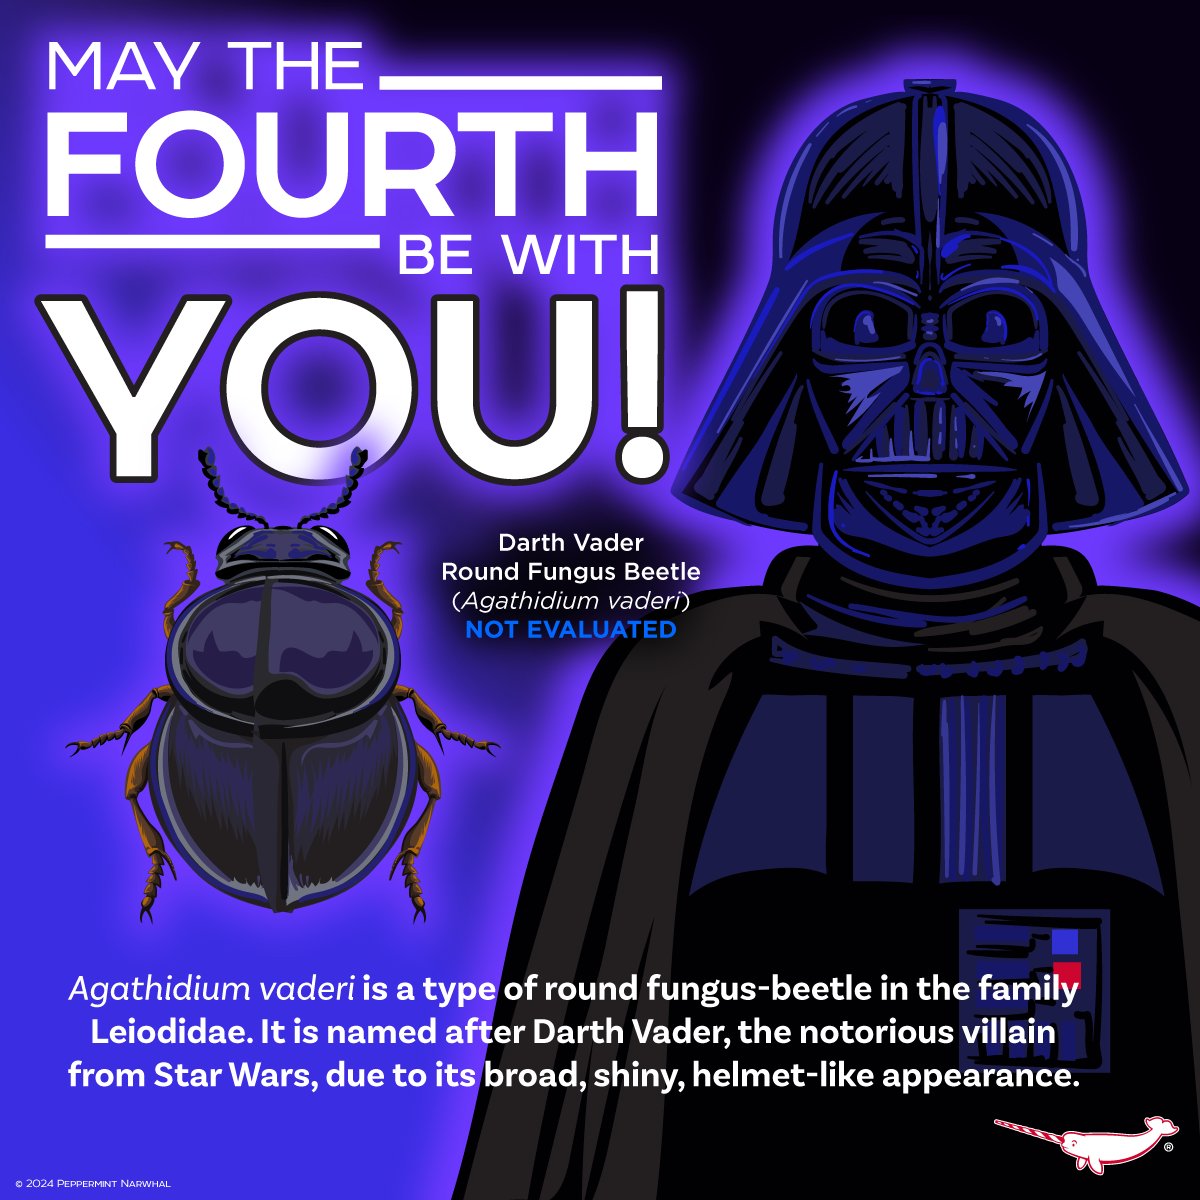 #MayTheFourthBeWithYou #Agathidium #vaderi Shop #PeppermintNarwhal: peppermintnarwhal.com International Shoppers visit our store on Etsy: etsy.com/shop/Peppermin… #MayTheFourth #MayThe4thBeWithYou #MayThe4th #DarthVader #Leiodidae #RoundFungusBeetle